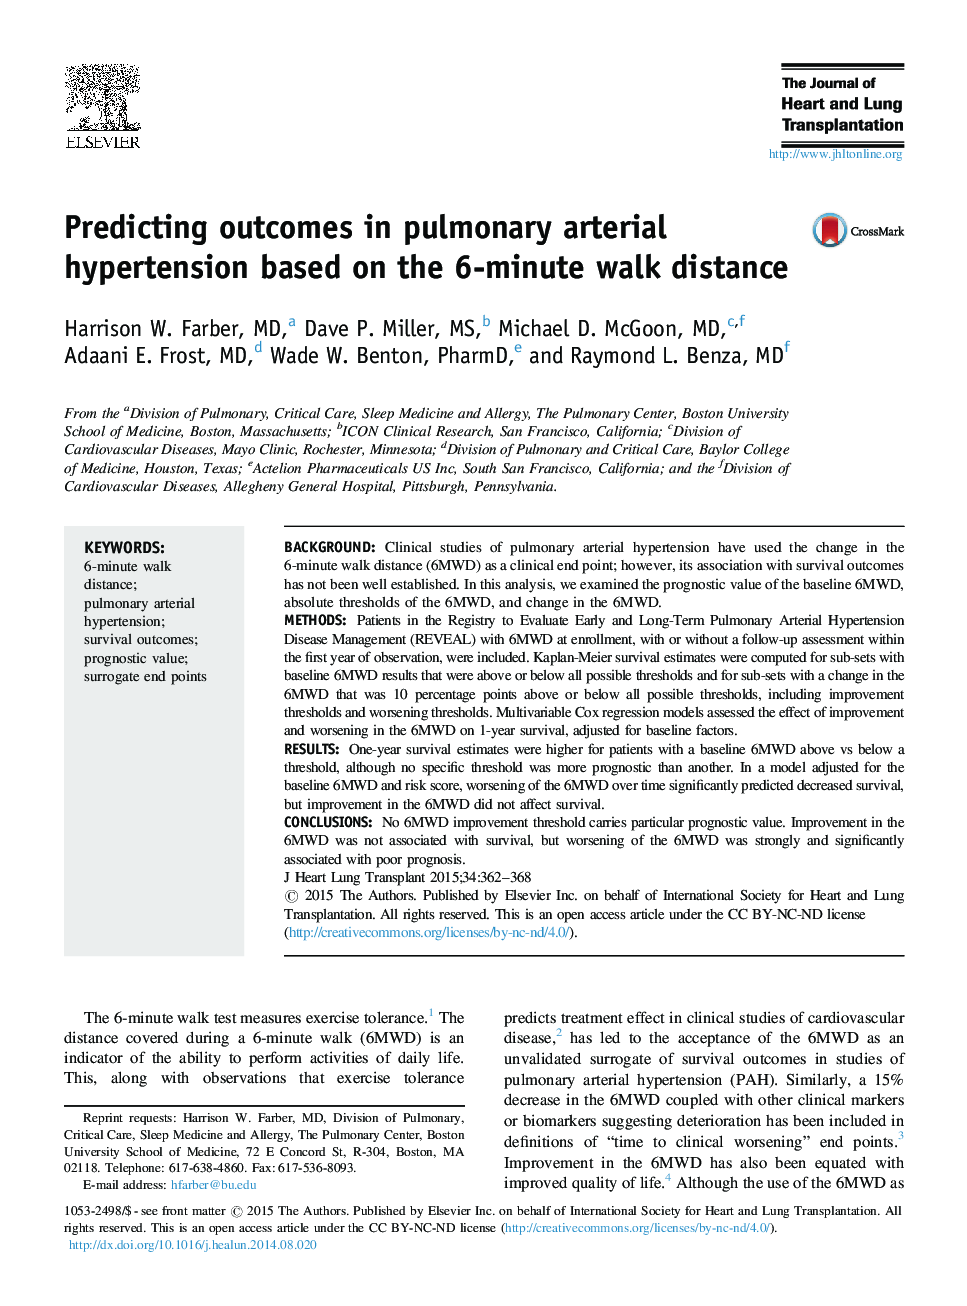 Predicting outcomes in pulmonary arterial hypertension based on the 6-minute walk distance